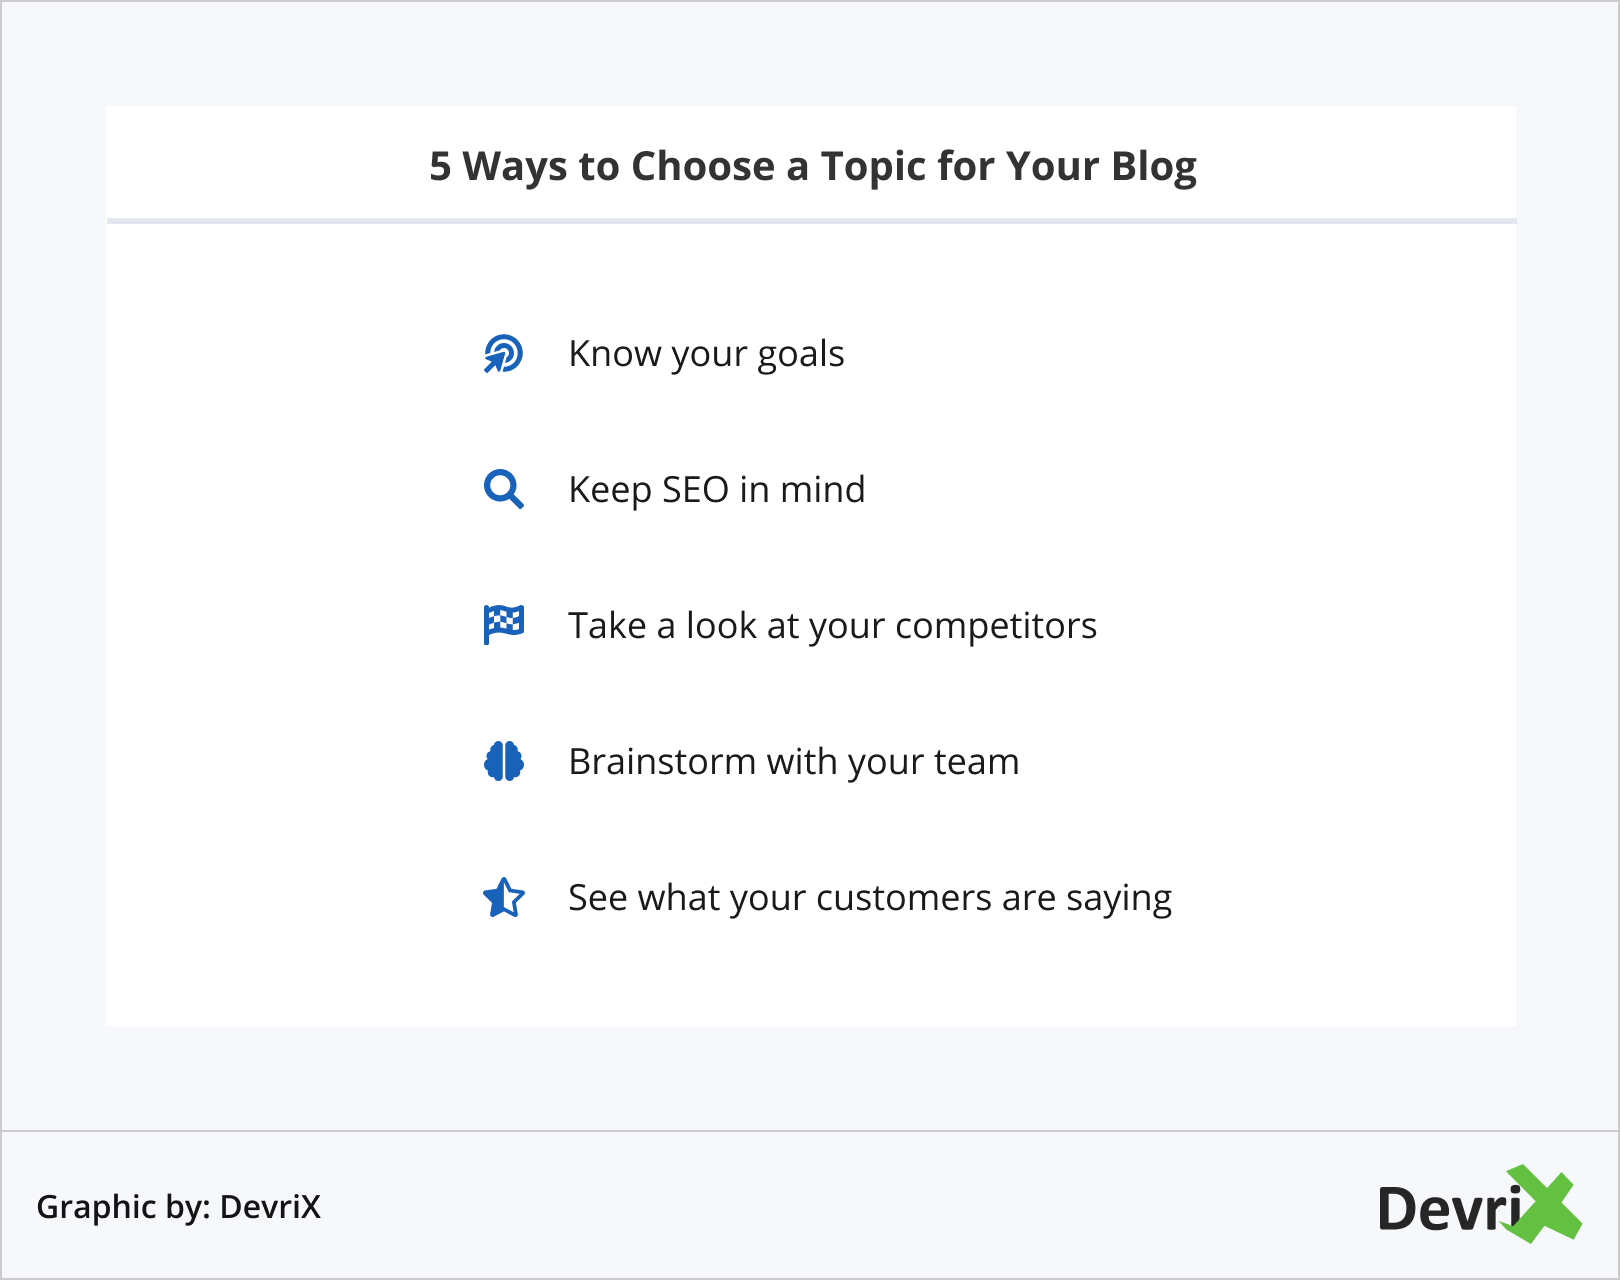 5 Ways to Choose a Topic for Your Blog